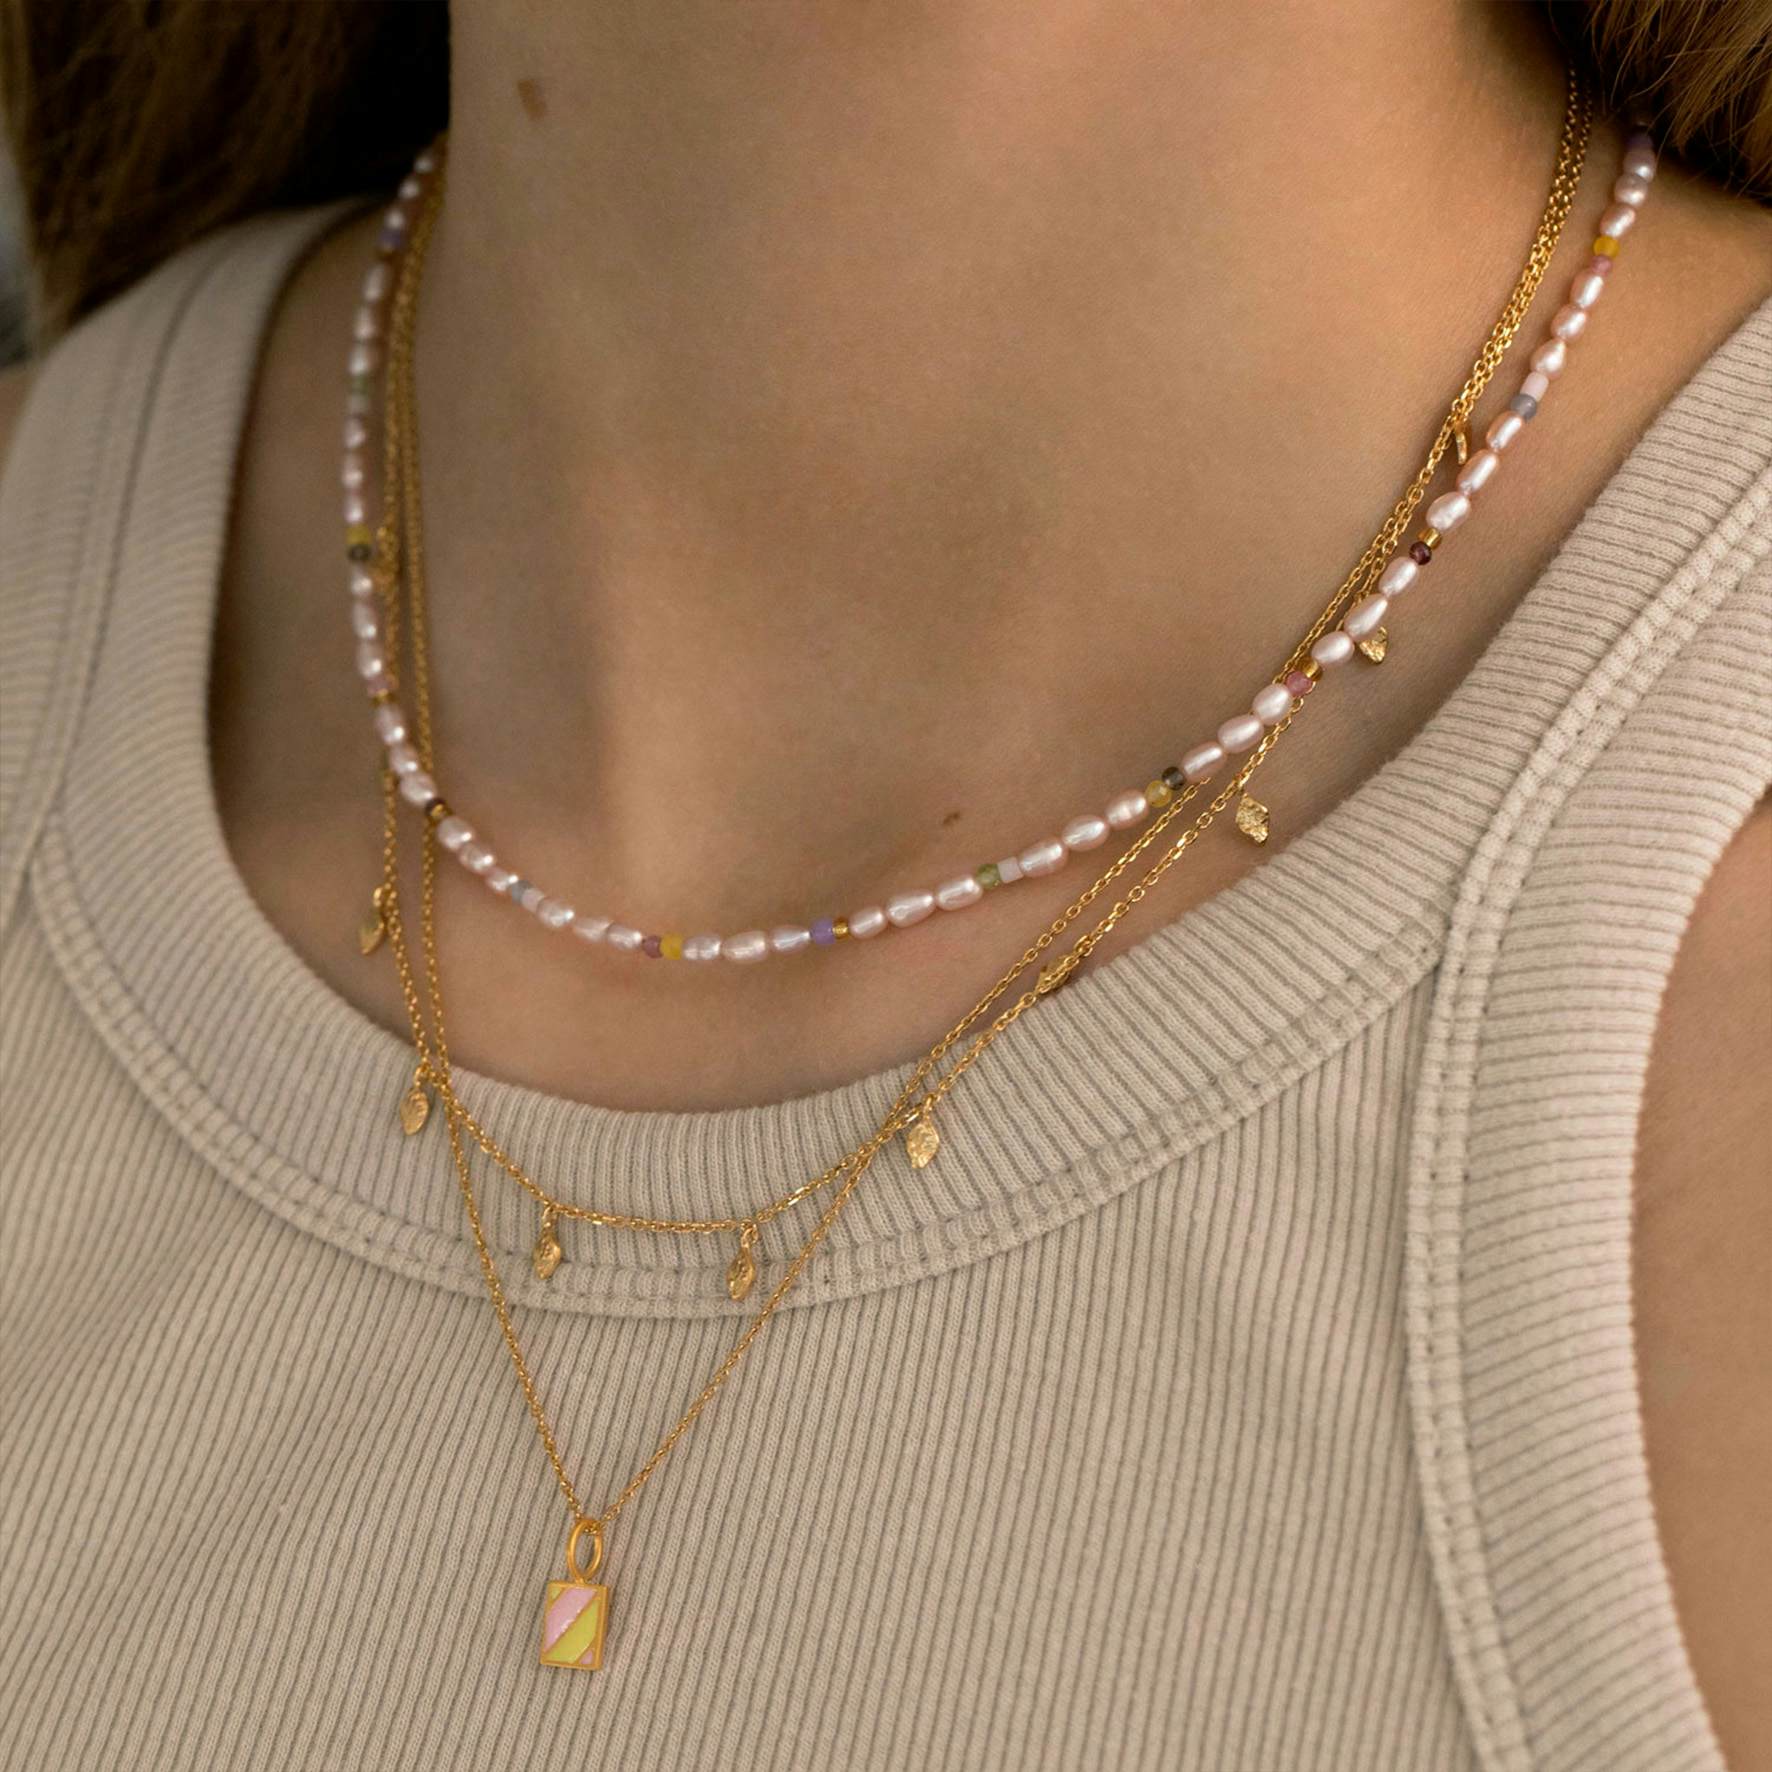 Confetti Pearl Necklace With Beige and Pastel Mix van STINE A Jewelry in Verguld-Zilver Sterling 925